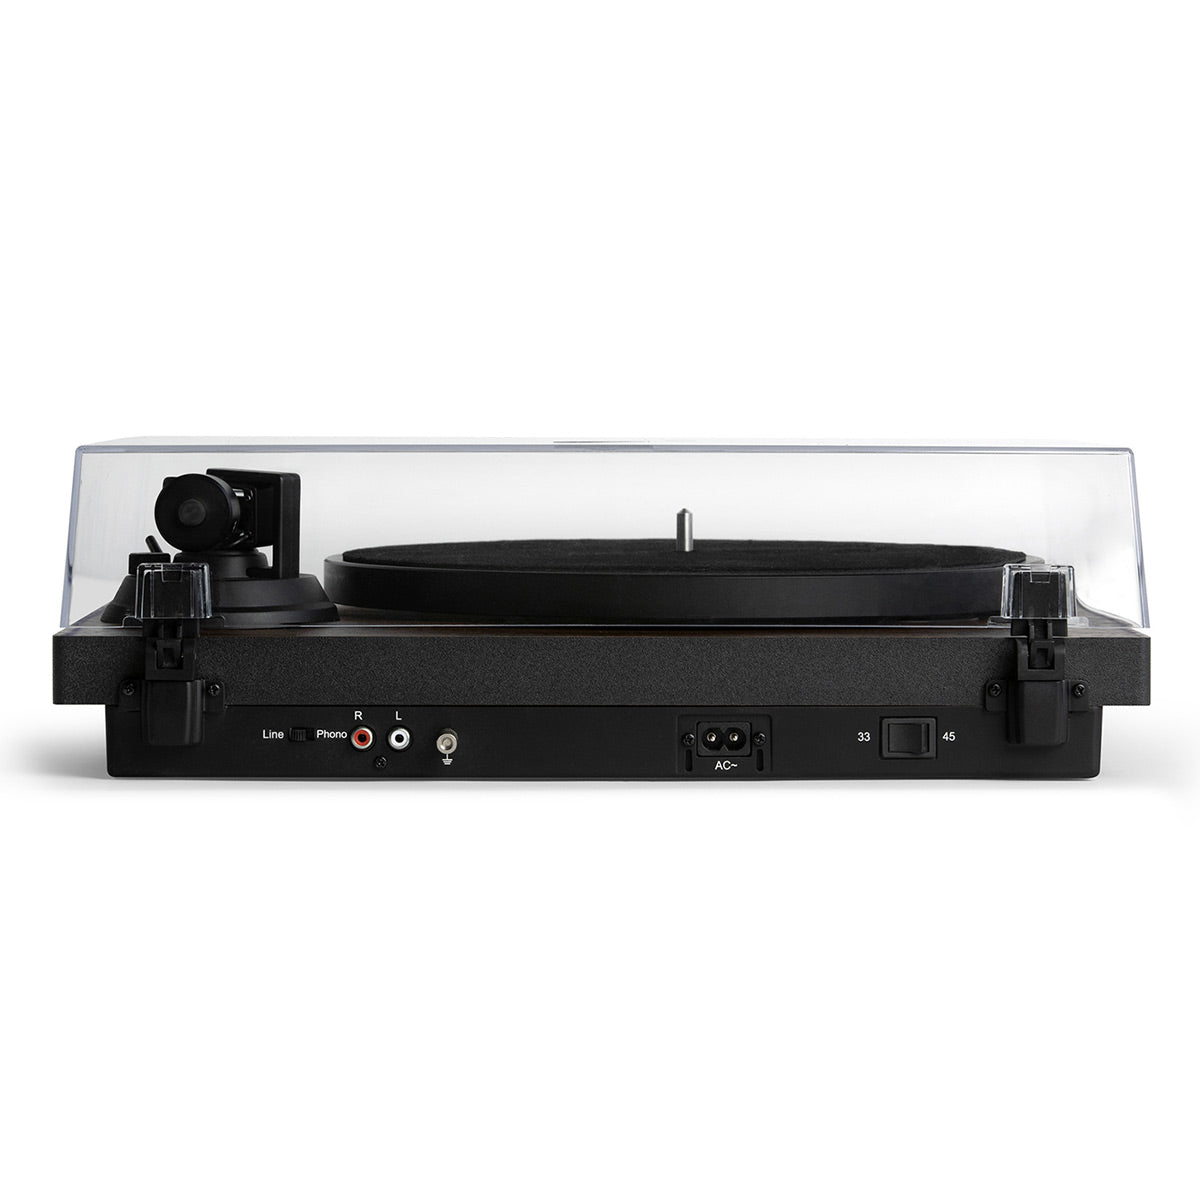 Victrola Premiere T1 Premium Turntable with Built-In Vinyl Stream Bluetooth Technology (Espresso)